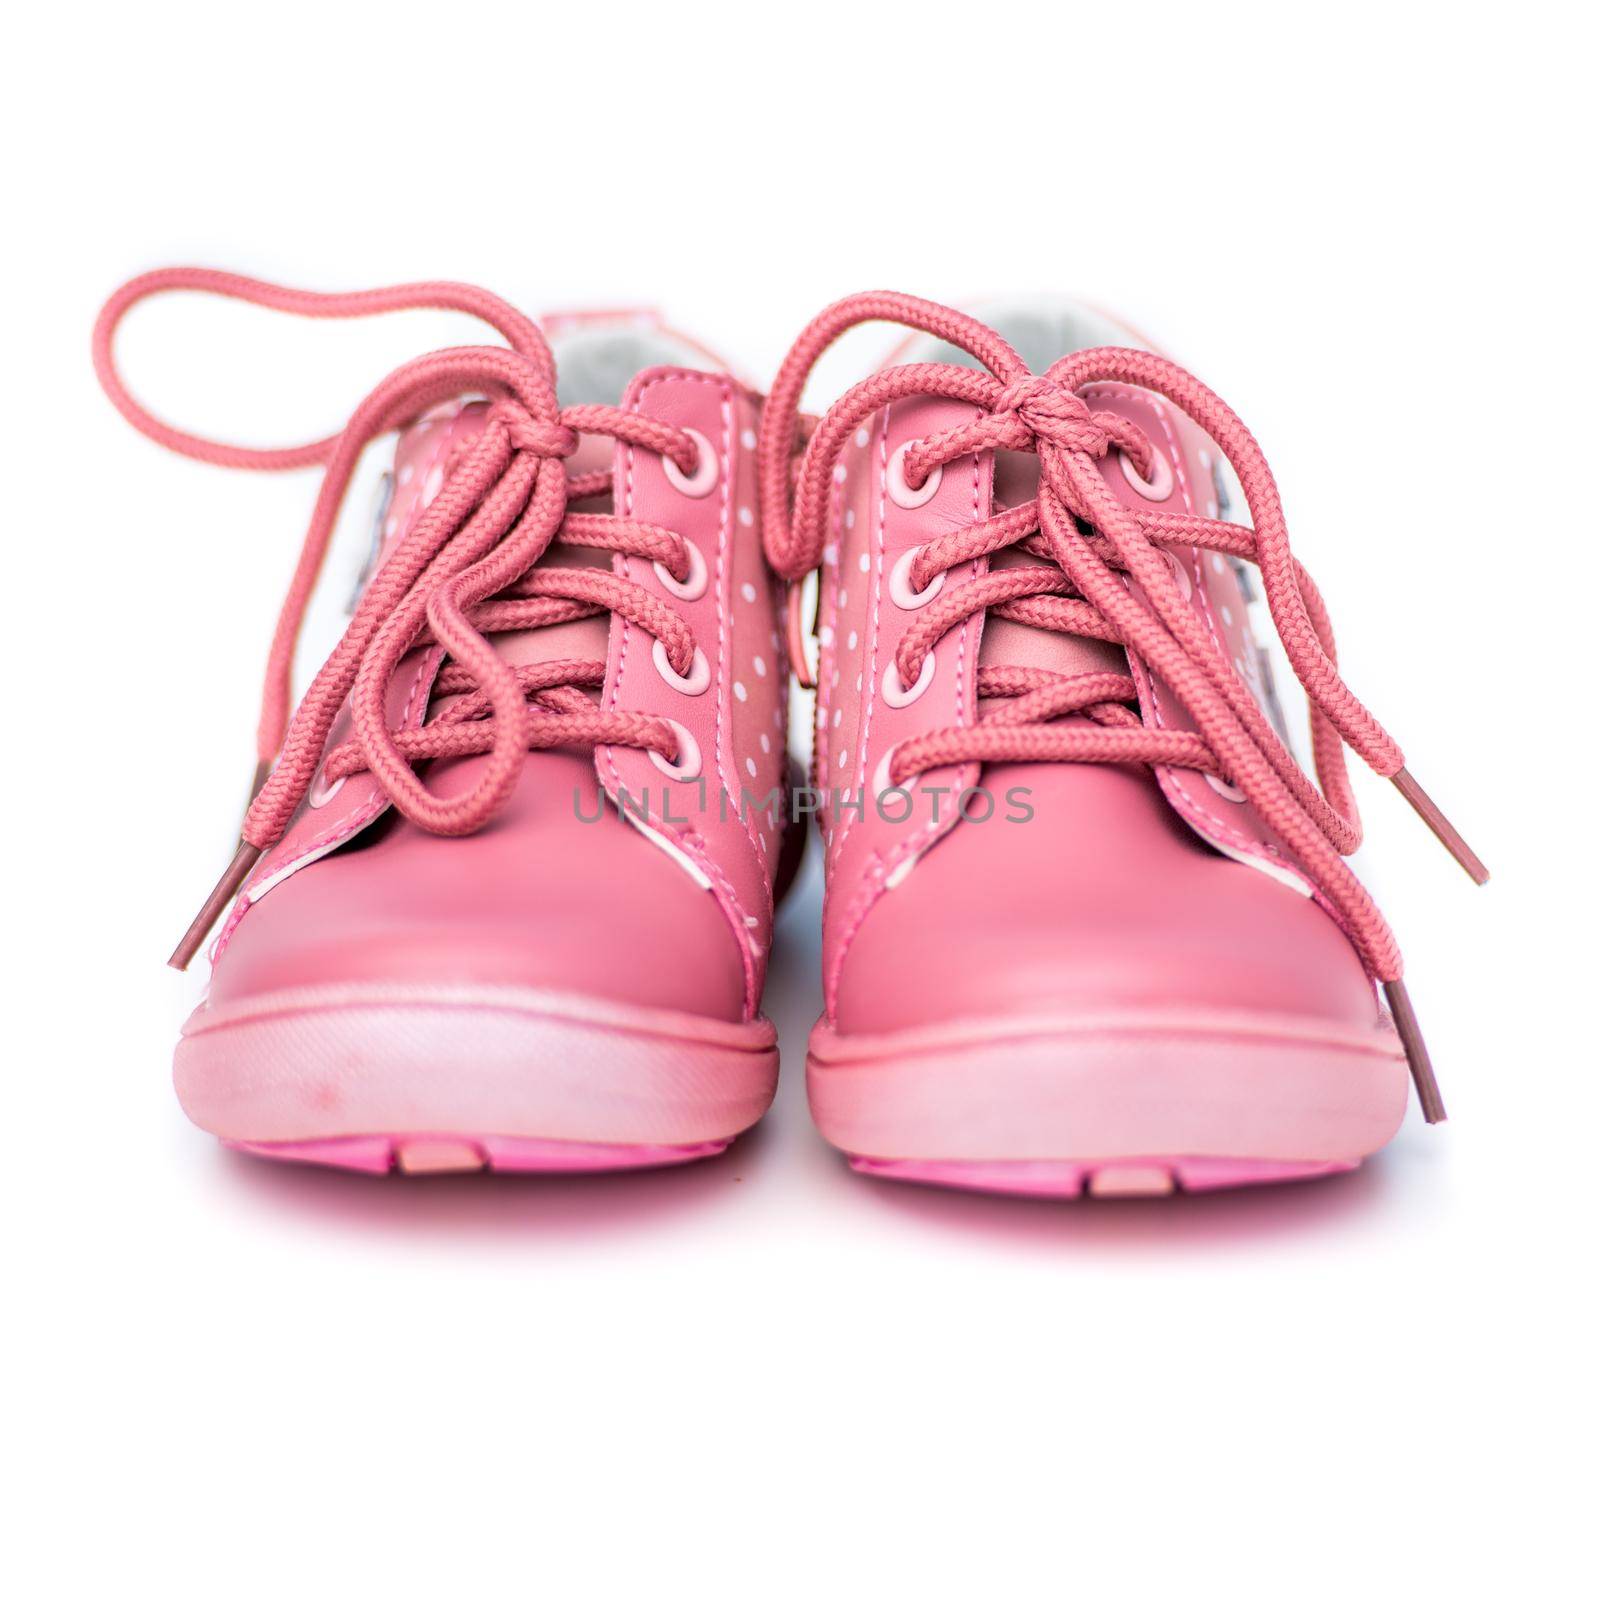 new pink shoes for a baby white background